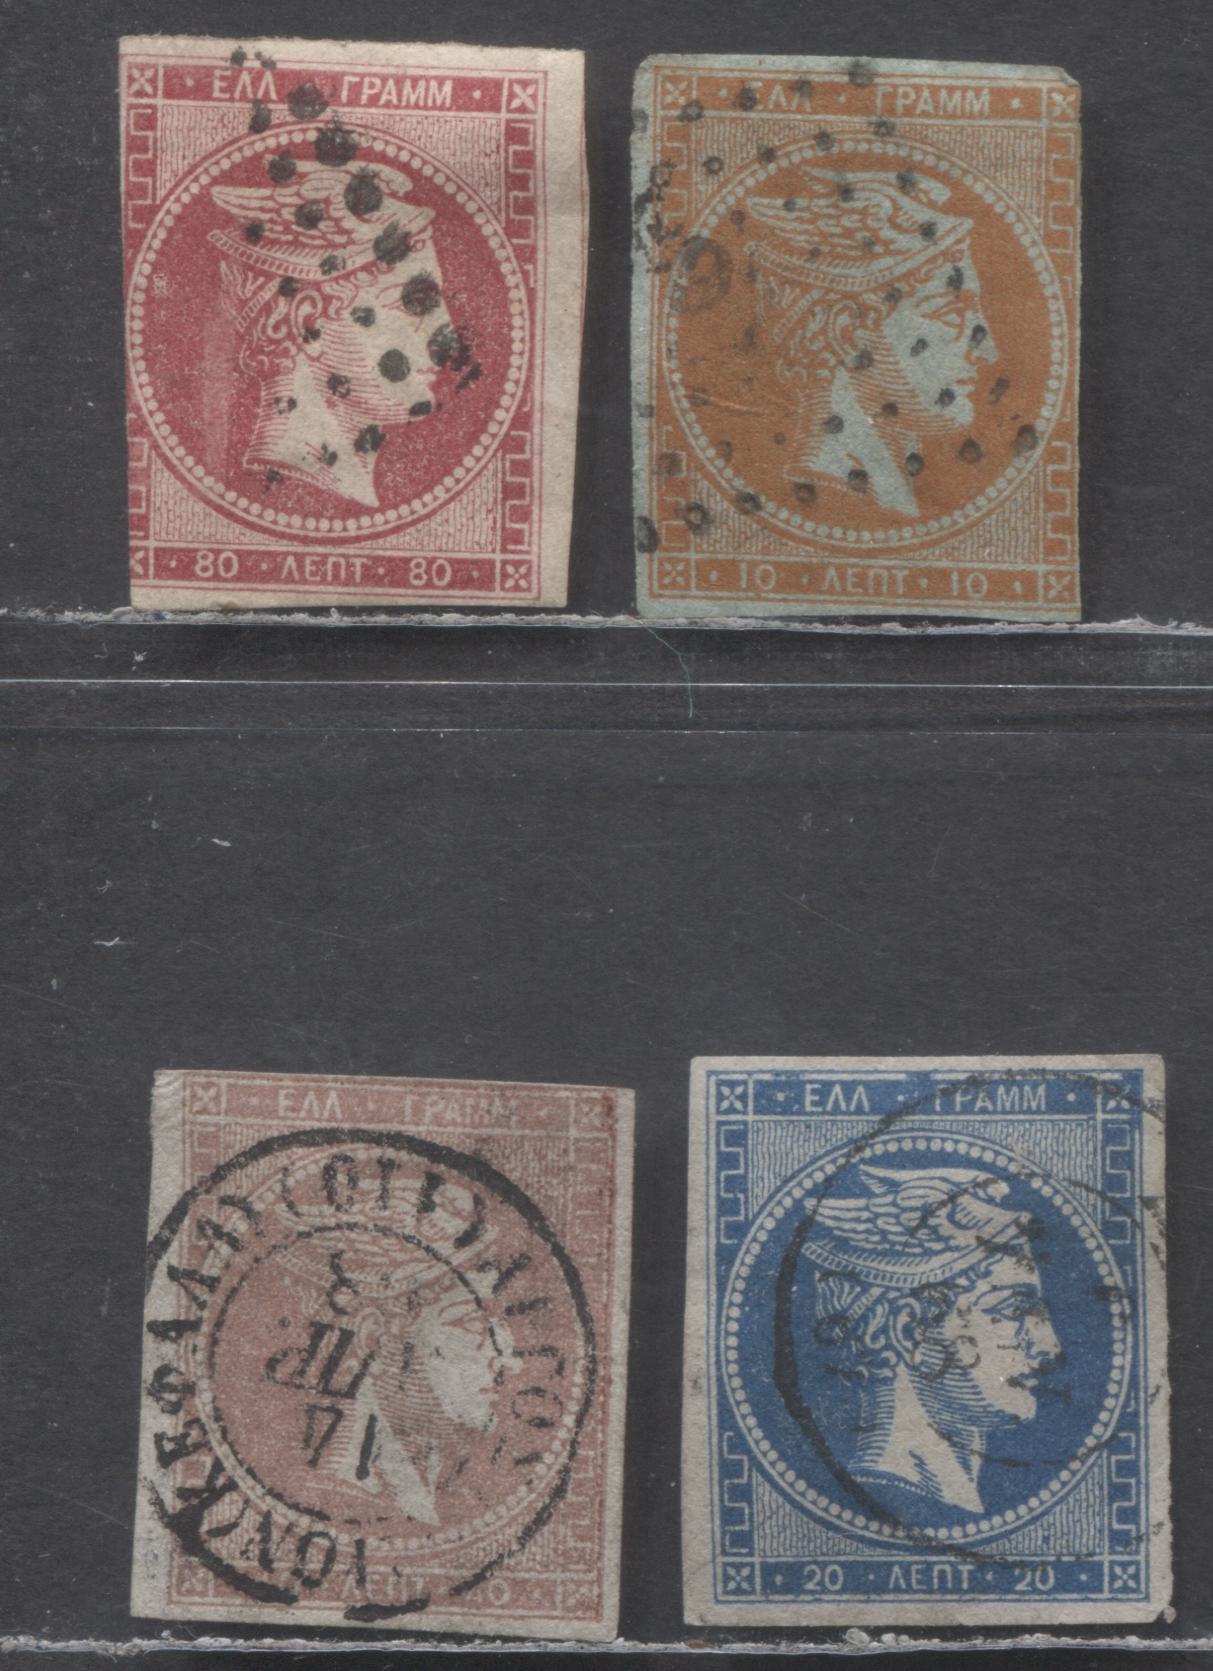 Lot 73 Greece SC#21b,27,22,19 1862-1868 Hermes Heads Issue, Athen's Prints And Cleaned Plates Printings All With Faults, 4 G-G Used Singles, Click on Listing to See ALL Pictures, Estimated Value $15 USD